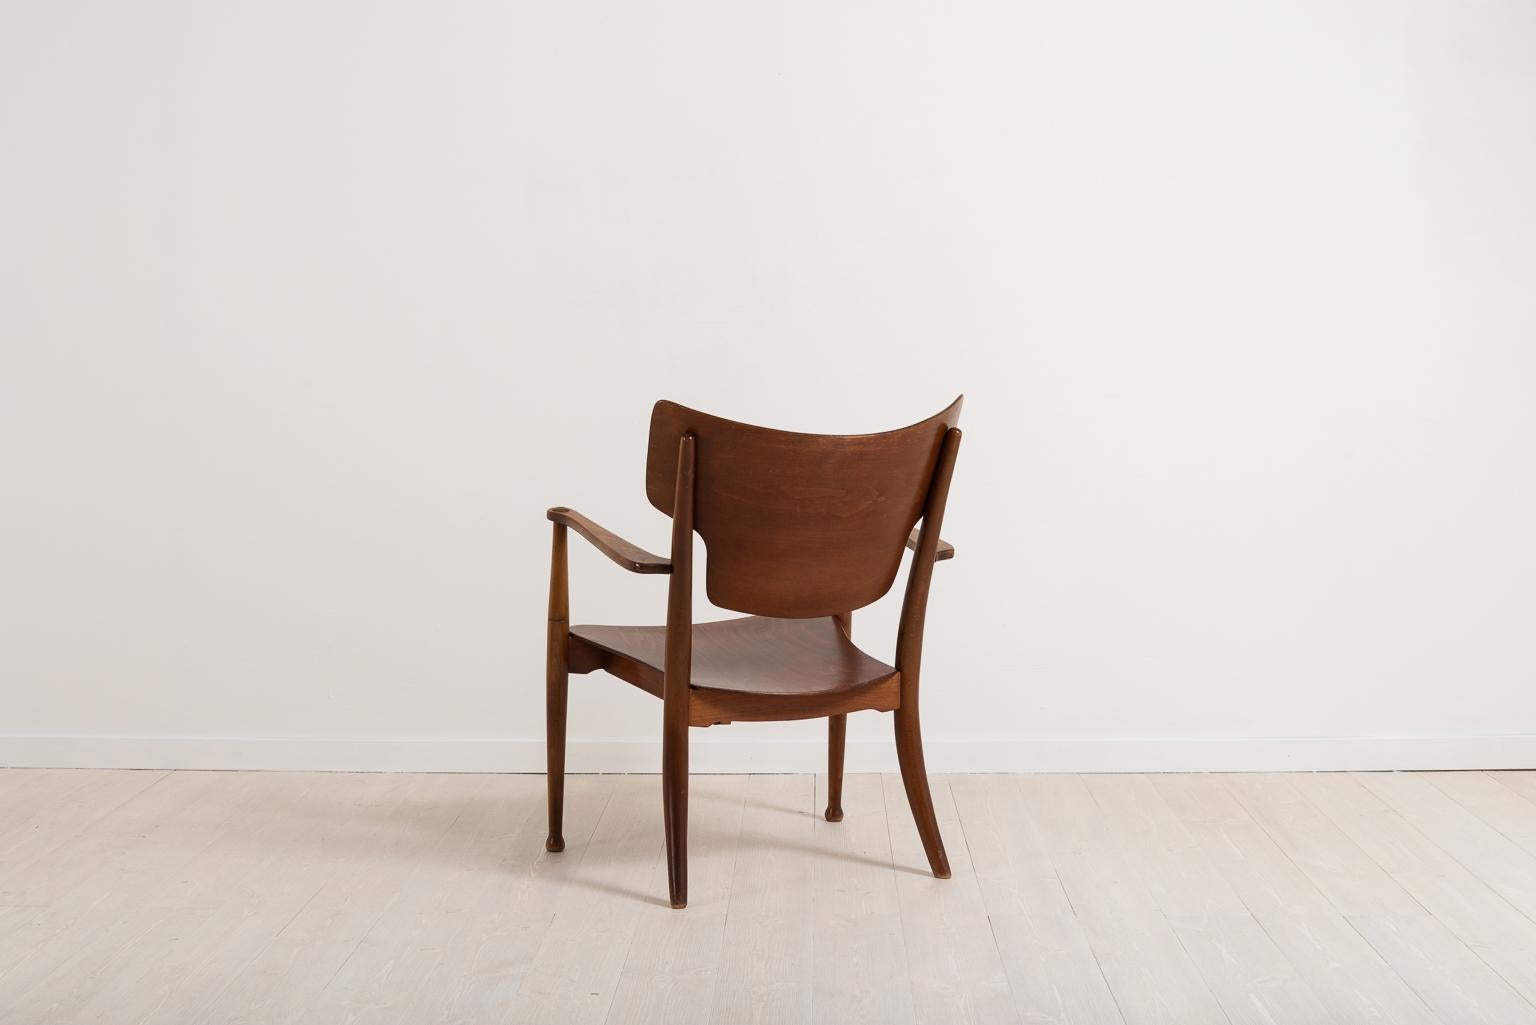 20th Century Chair 'Portex' Designed 1944 by Peter Hvidt and Orla Molgaard-Nielsen